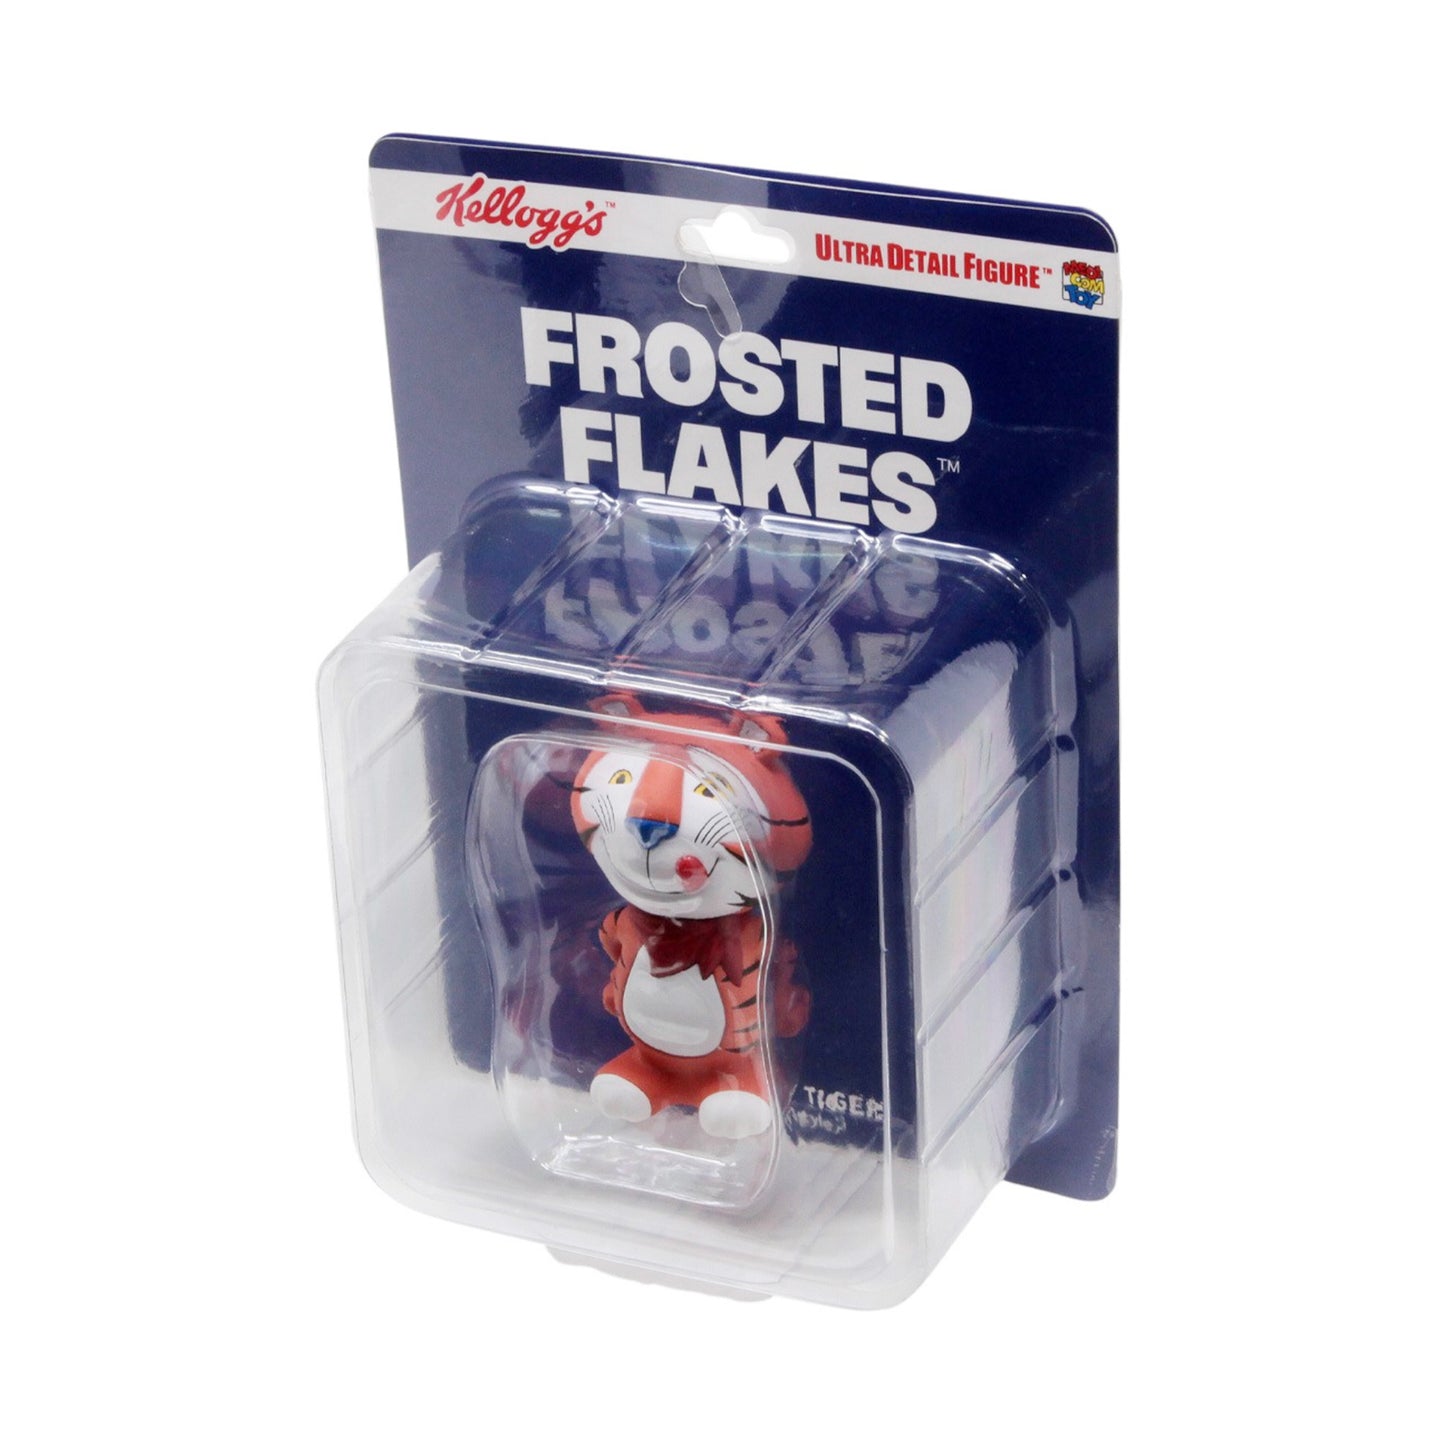 MEDICOM TOY: UDF - Kellogg's Frosted Flakes Tony The Tiger Classic Style Figure